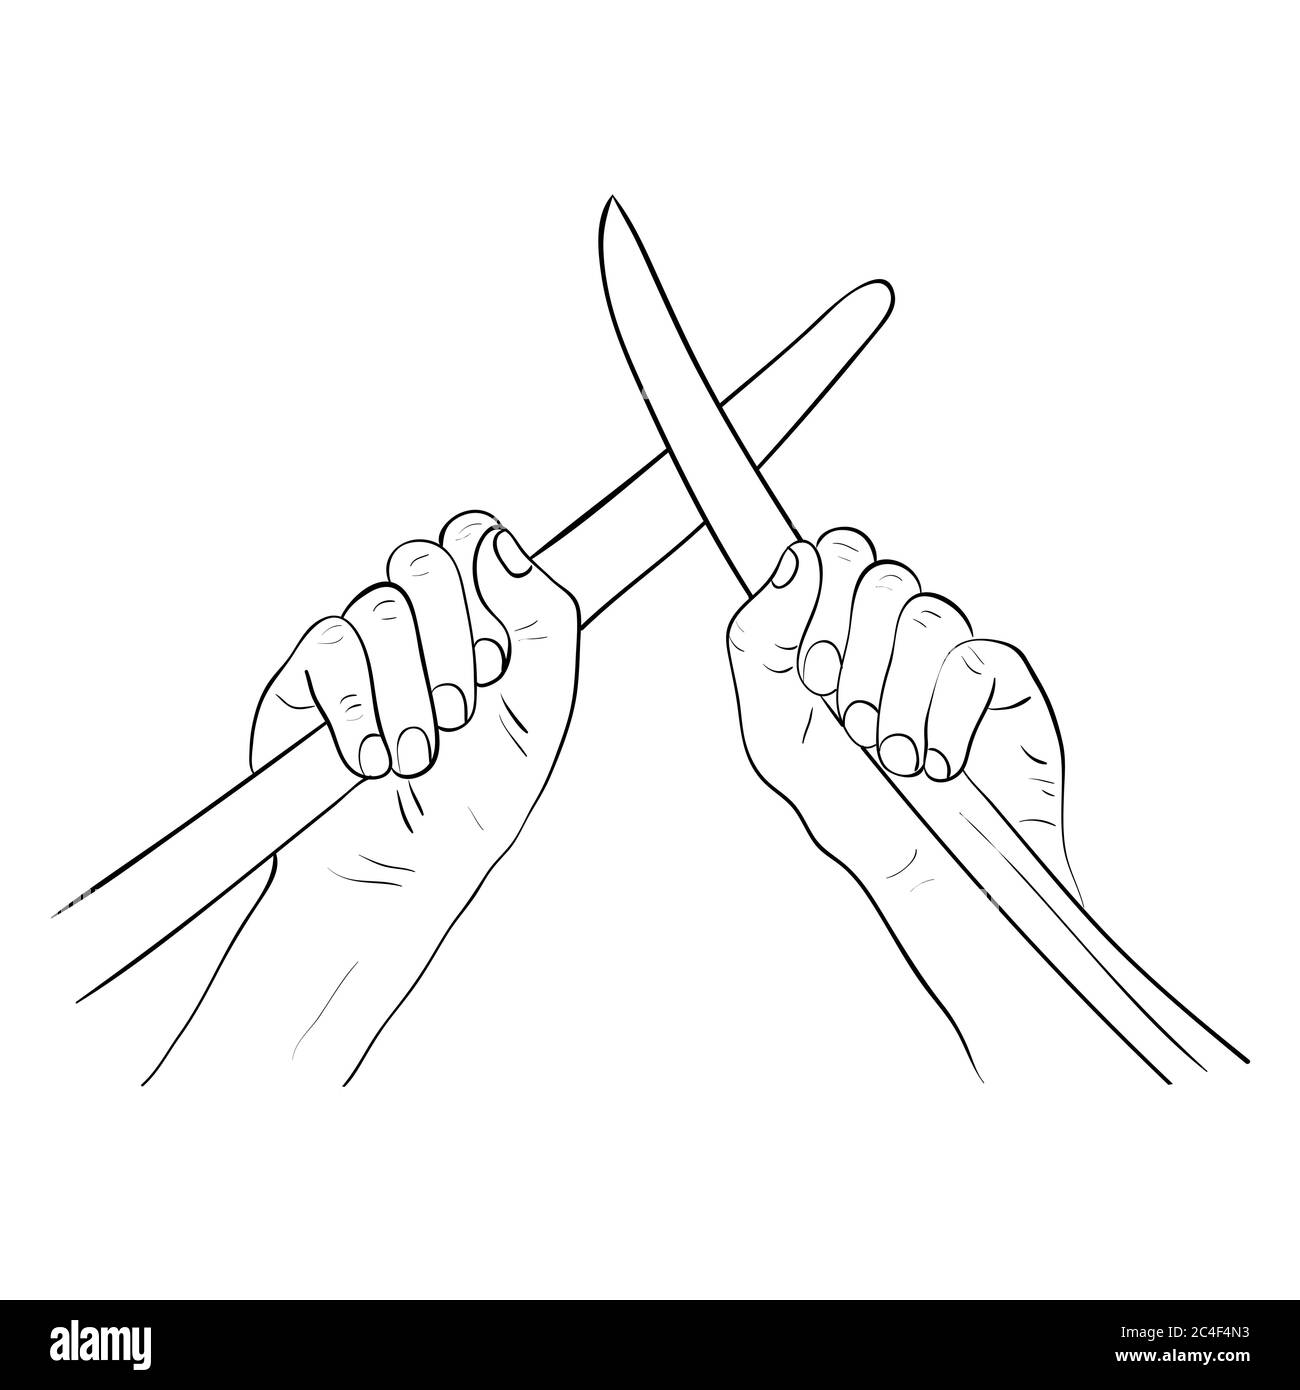 Hands breaking up a fight by taking apart sword blades. Cartoon vector illustration. Hands holding crossed swords. Stock Vector